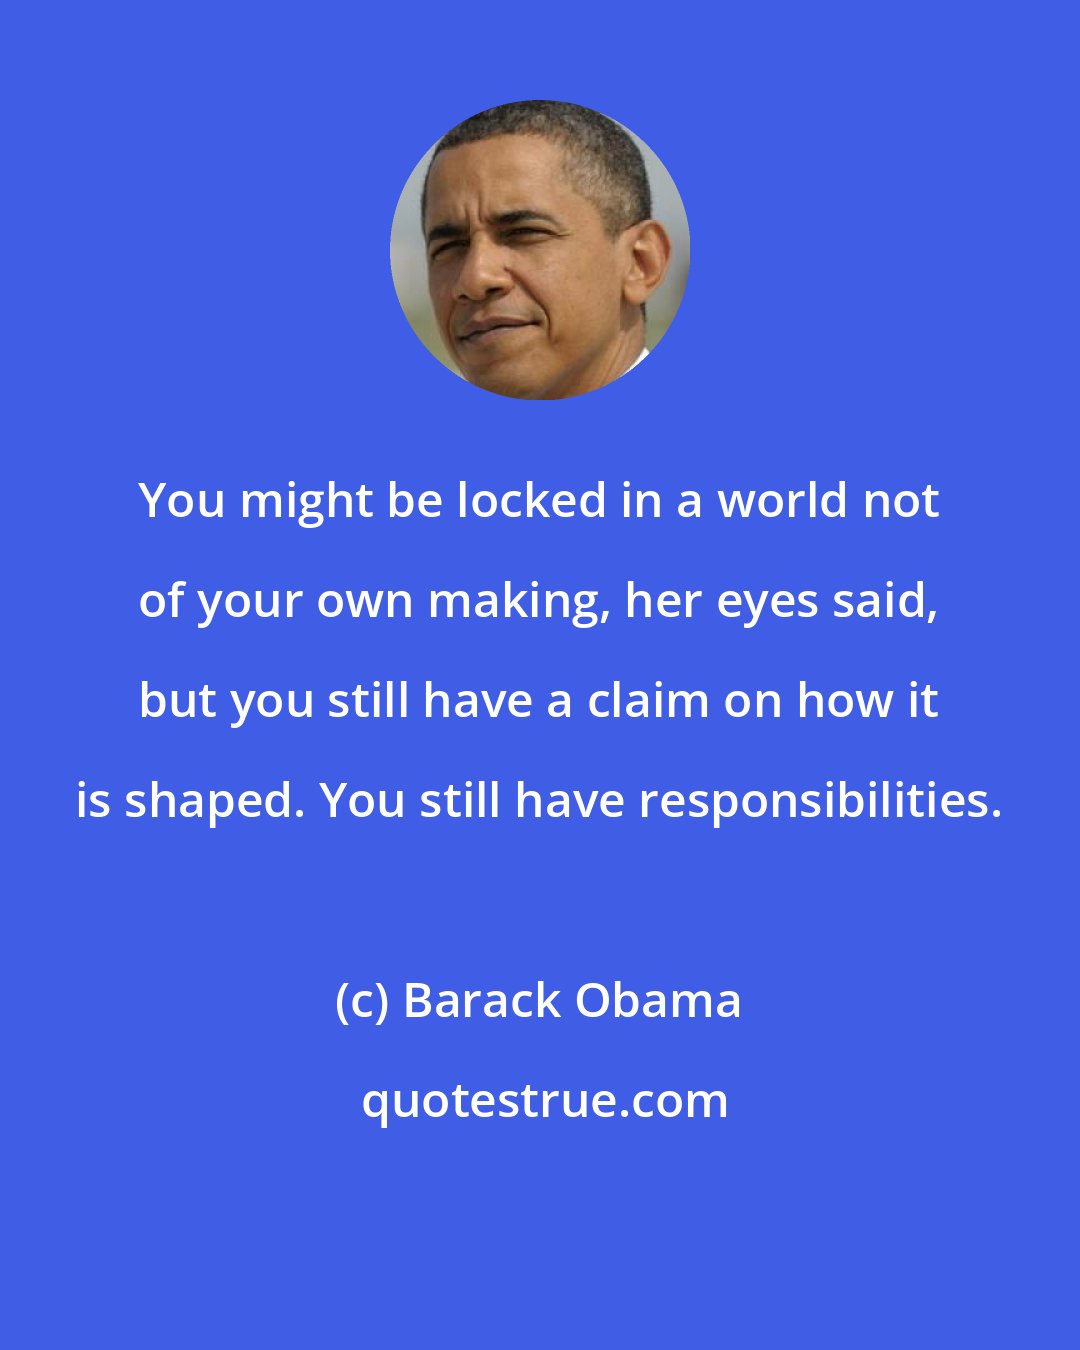 Barack Obama: You might be locked in a world not of your own making, her eyes said, but you still have a claim on how it is shaped. You still have responsibilities.